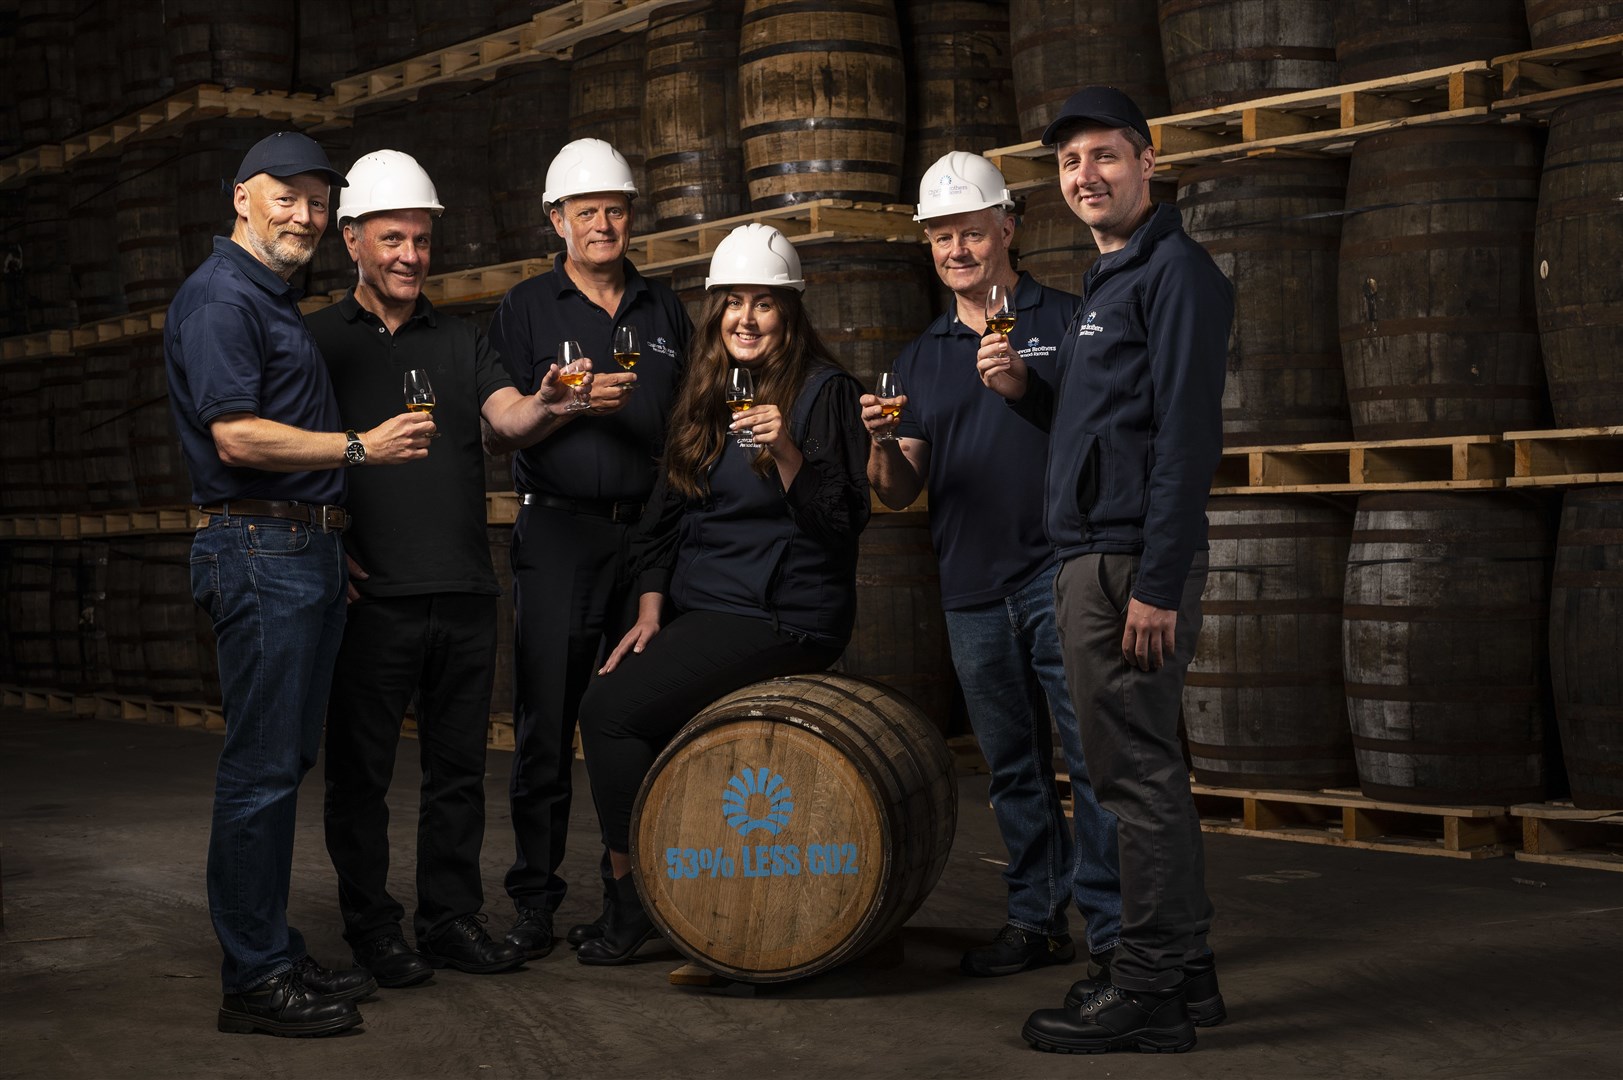 The Glentauchers engineering team celebrates a job well done. Engineering manager Neil Fraser, project manager Ewen Fraser, distillery operations manager Trevor Buckley, assistant project engineer Anna Pilkington; project engineer Fenton Perrie, control engineer Darren Main...Picture: John Paul Photography / Chivas Brothers